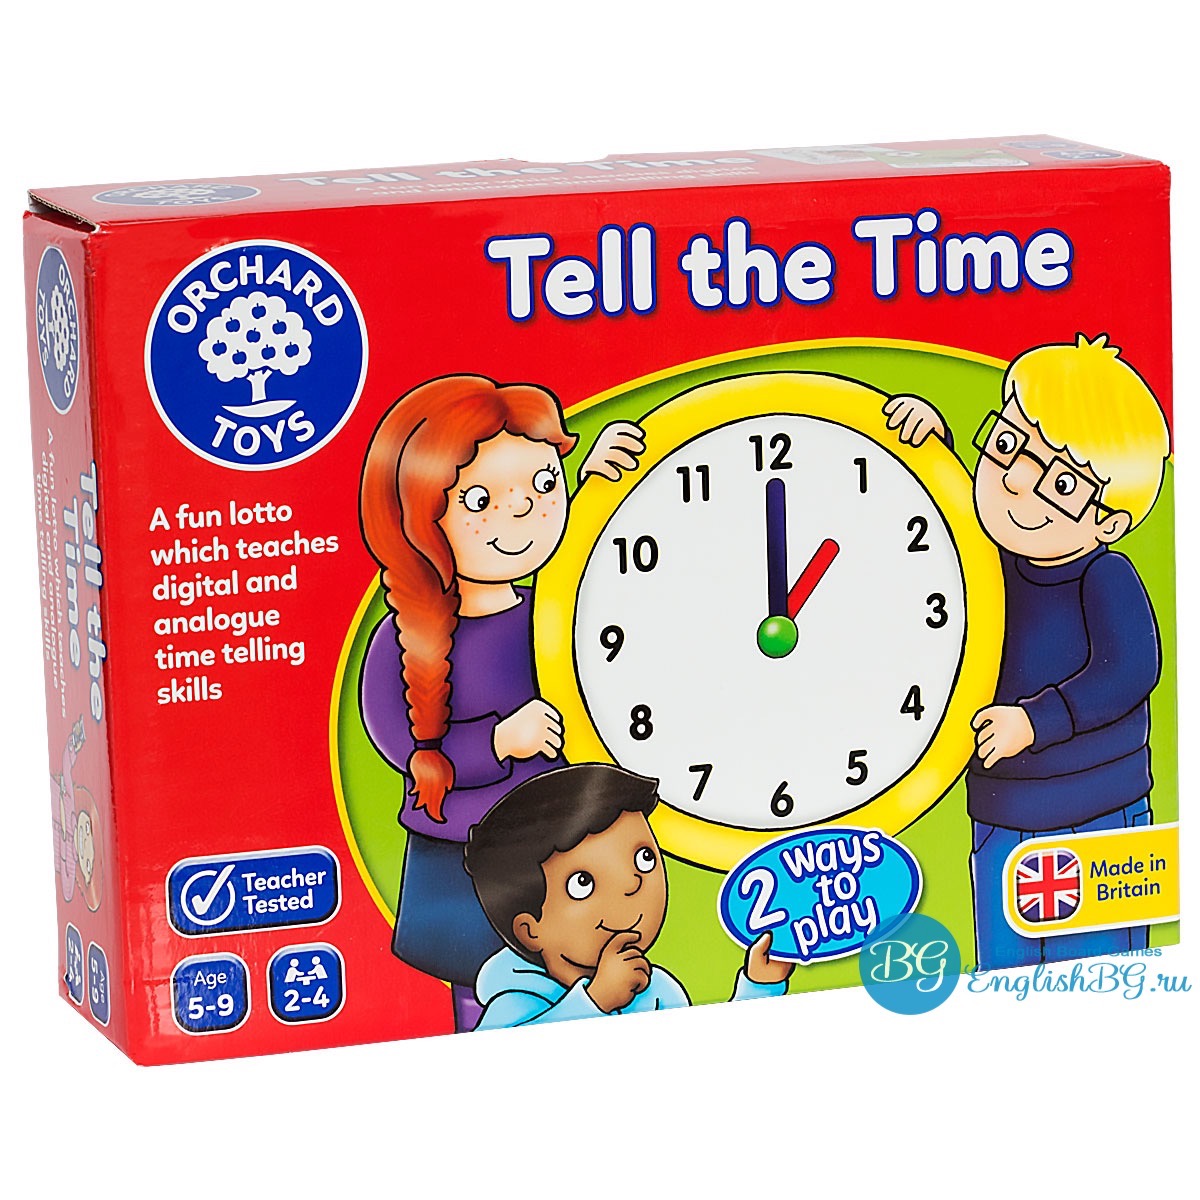 How to tell time. Telling the time. The times. To tell the time. Настольные игры для изучения английского языка.